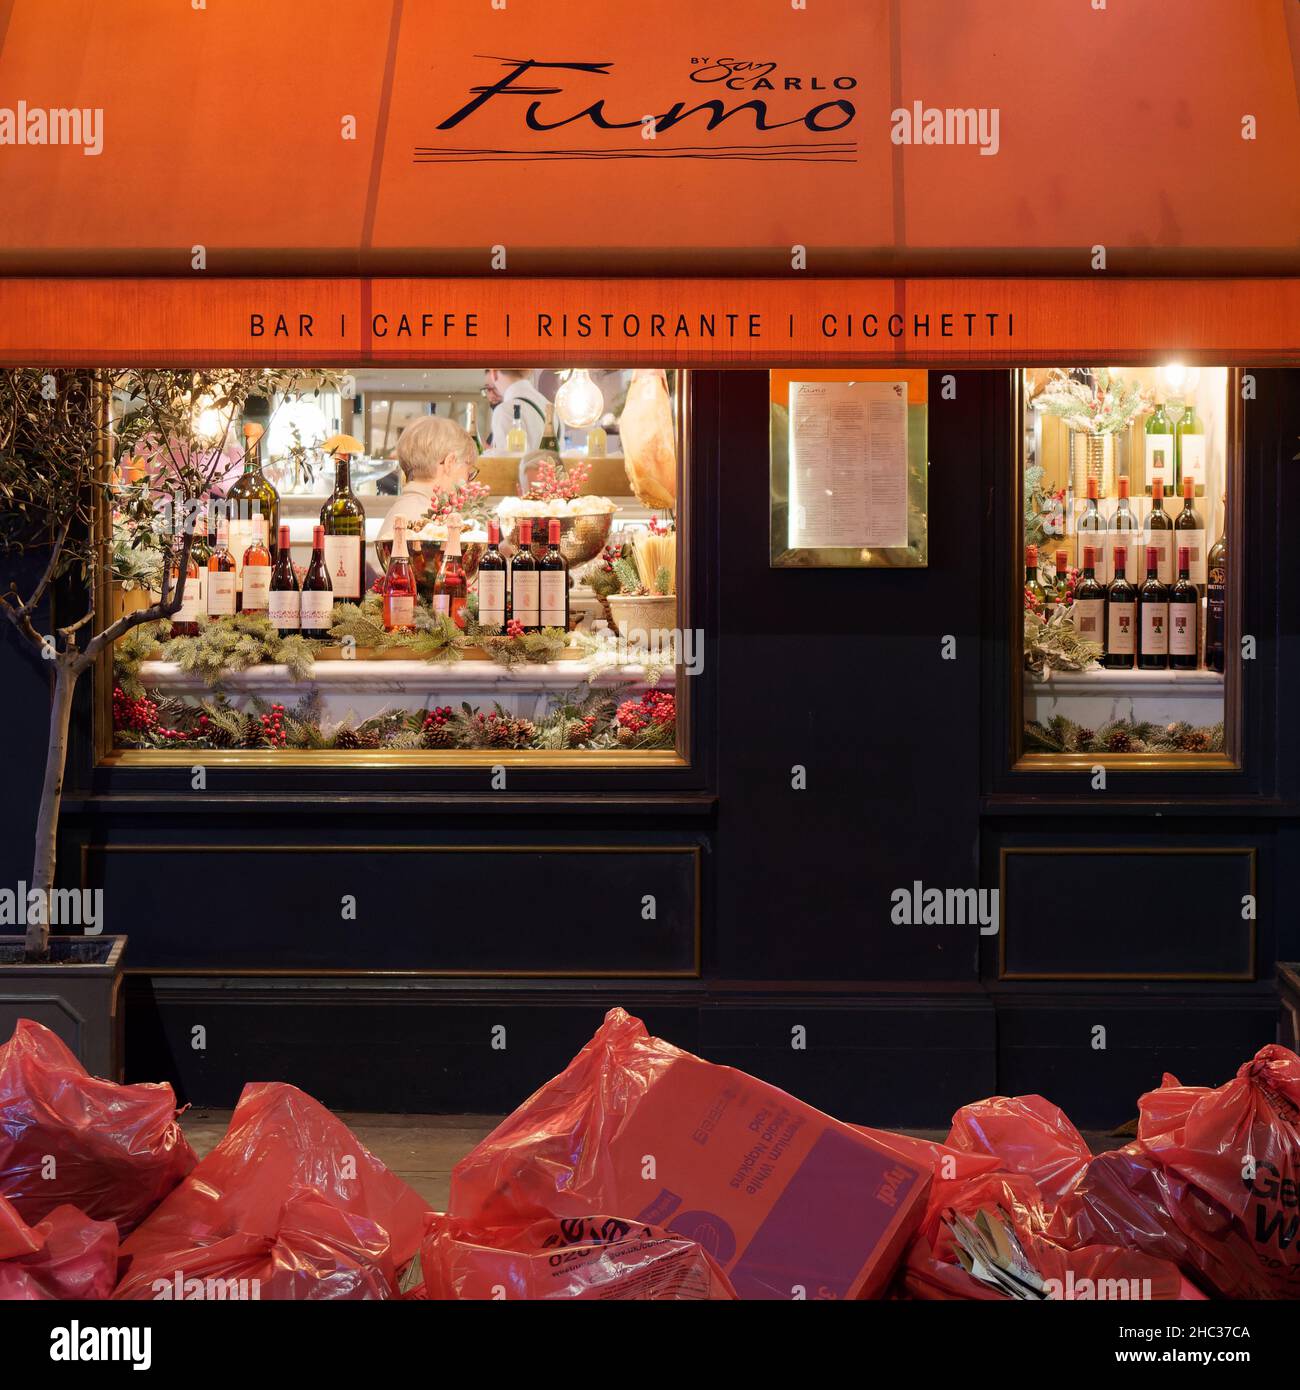 London, Greater London, England, December 15 2021: Italian Restaurant Fumo at night with refuse bags in the foreground. Stock Photo